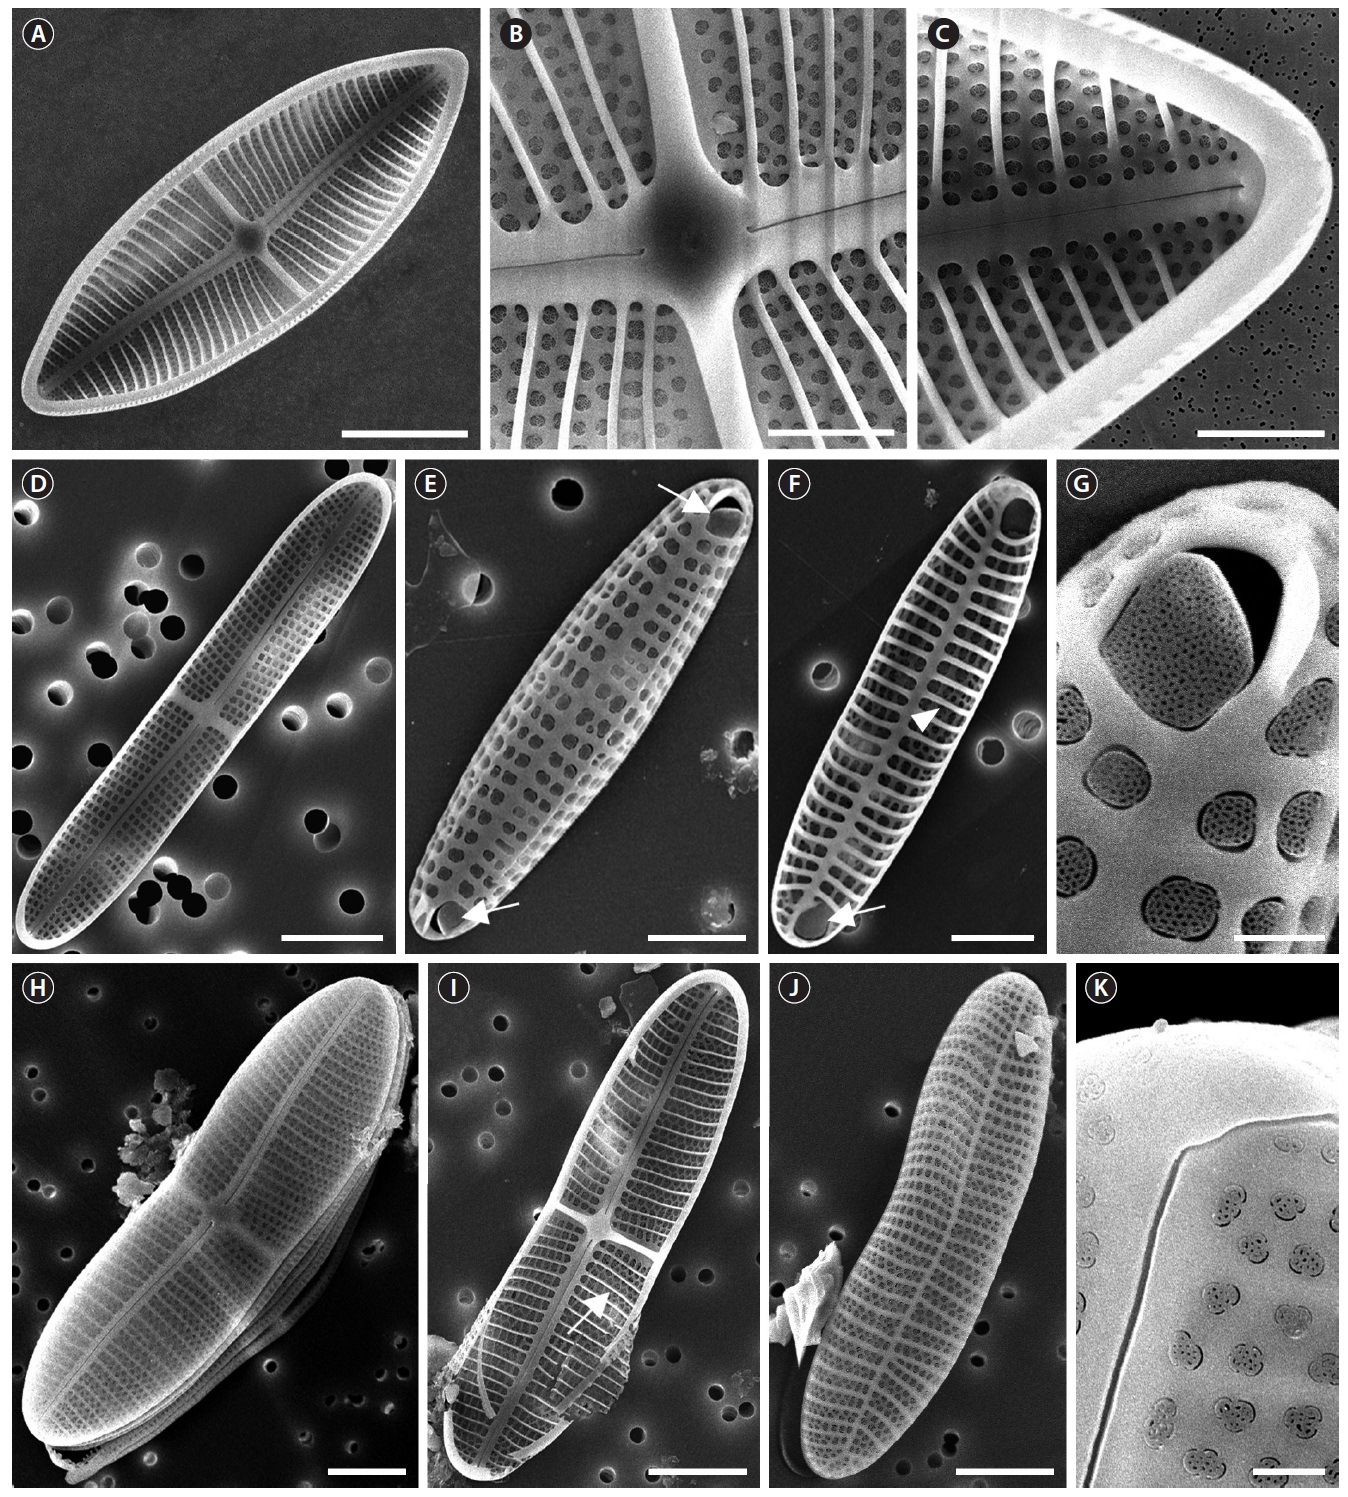 SEM microphotographs of the Achnanthes spp. (A) Internal view of RV of the A. javanica. (B) Central area (stauros) of RV of the A. javanica. (C)
Terminal end and costae of RV of the A. javanica. (D) Internal RV of the A. kuwaitensis. (E) ARV with terminal obiculi (arrows) of the A. kuwaitensis. (F) Internal
ARV with terminal obiculi (arrows) and costae (arrowhead) of the A. kuwaitensis. (G) Terminal obiculi of the A. kuwaitensis. (H) RV of the A. longipes. (I)
Internal RV with costae (arrow) of the A. longipes. (J) External RV of the A. longipes. (K) Raphe ending of the A. longipes. Scale bars represent: A, 20 μm; B, C, E,
F, 5 μm; D, H-J, 10 μm; G, K, 1 μm.